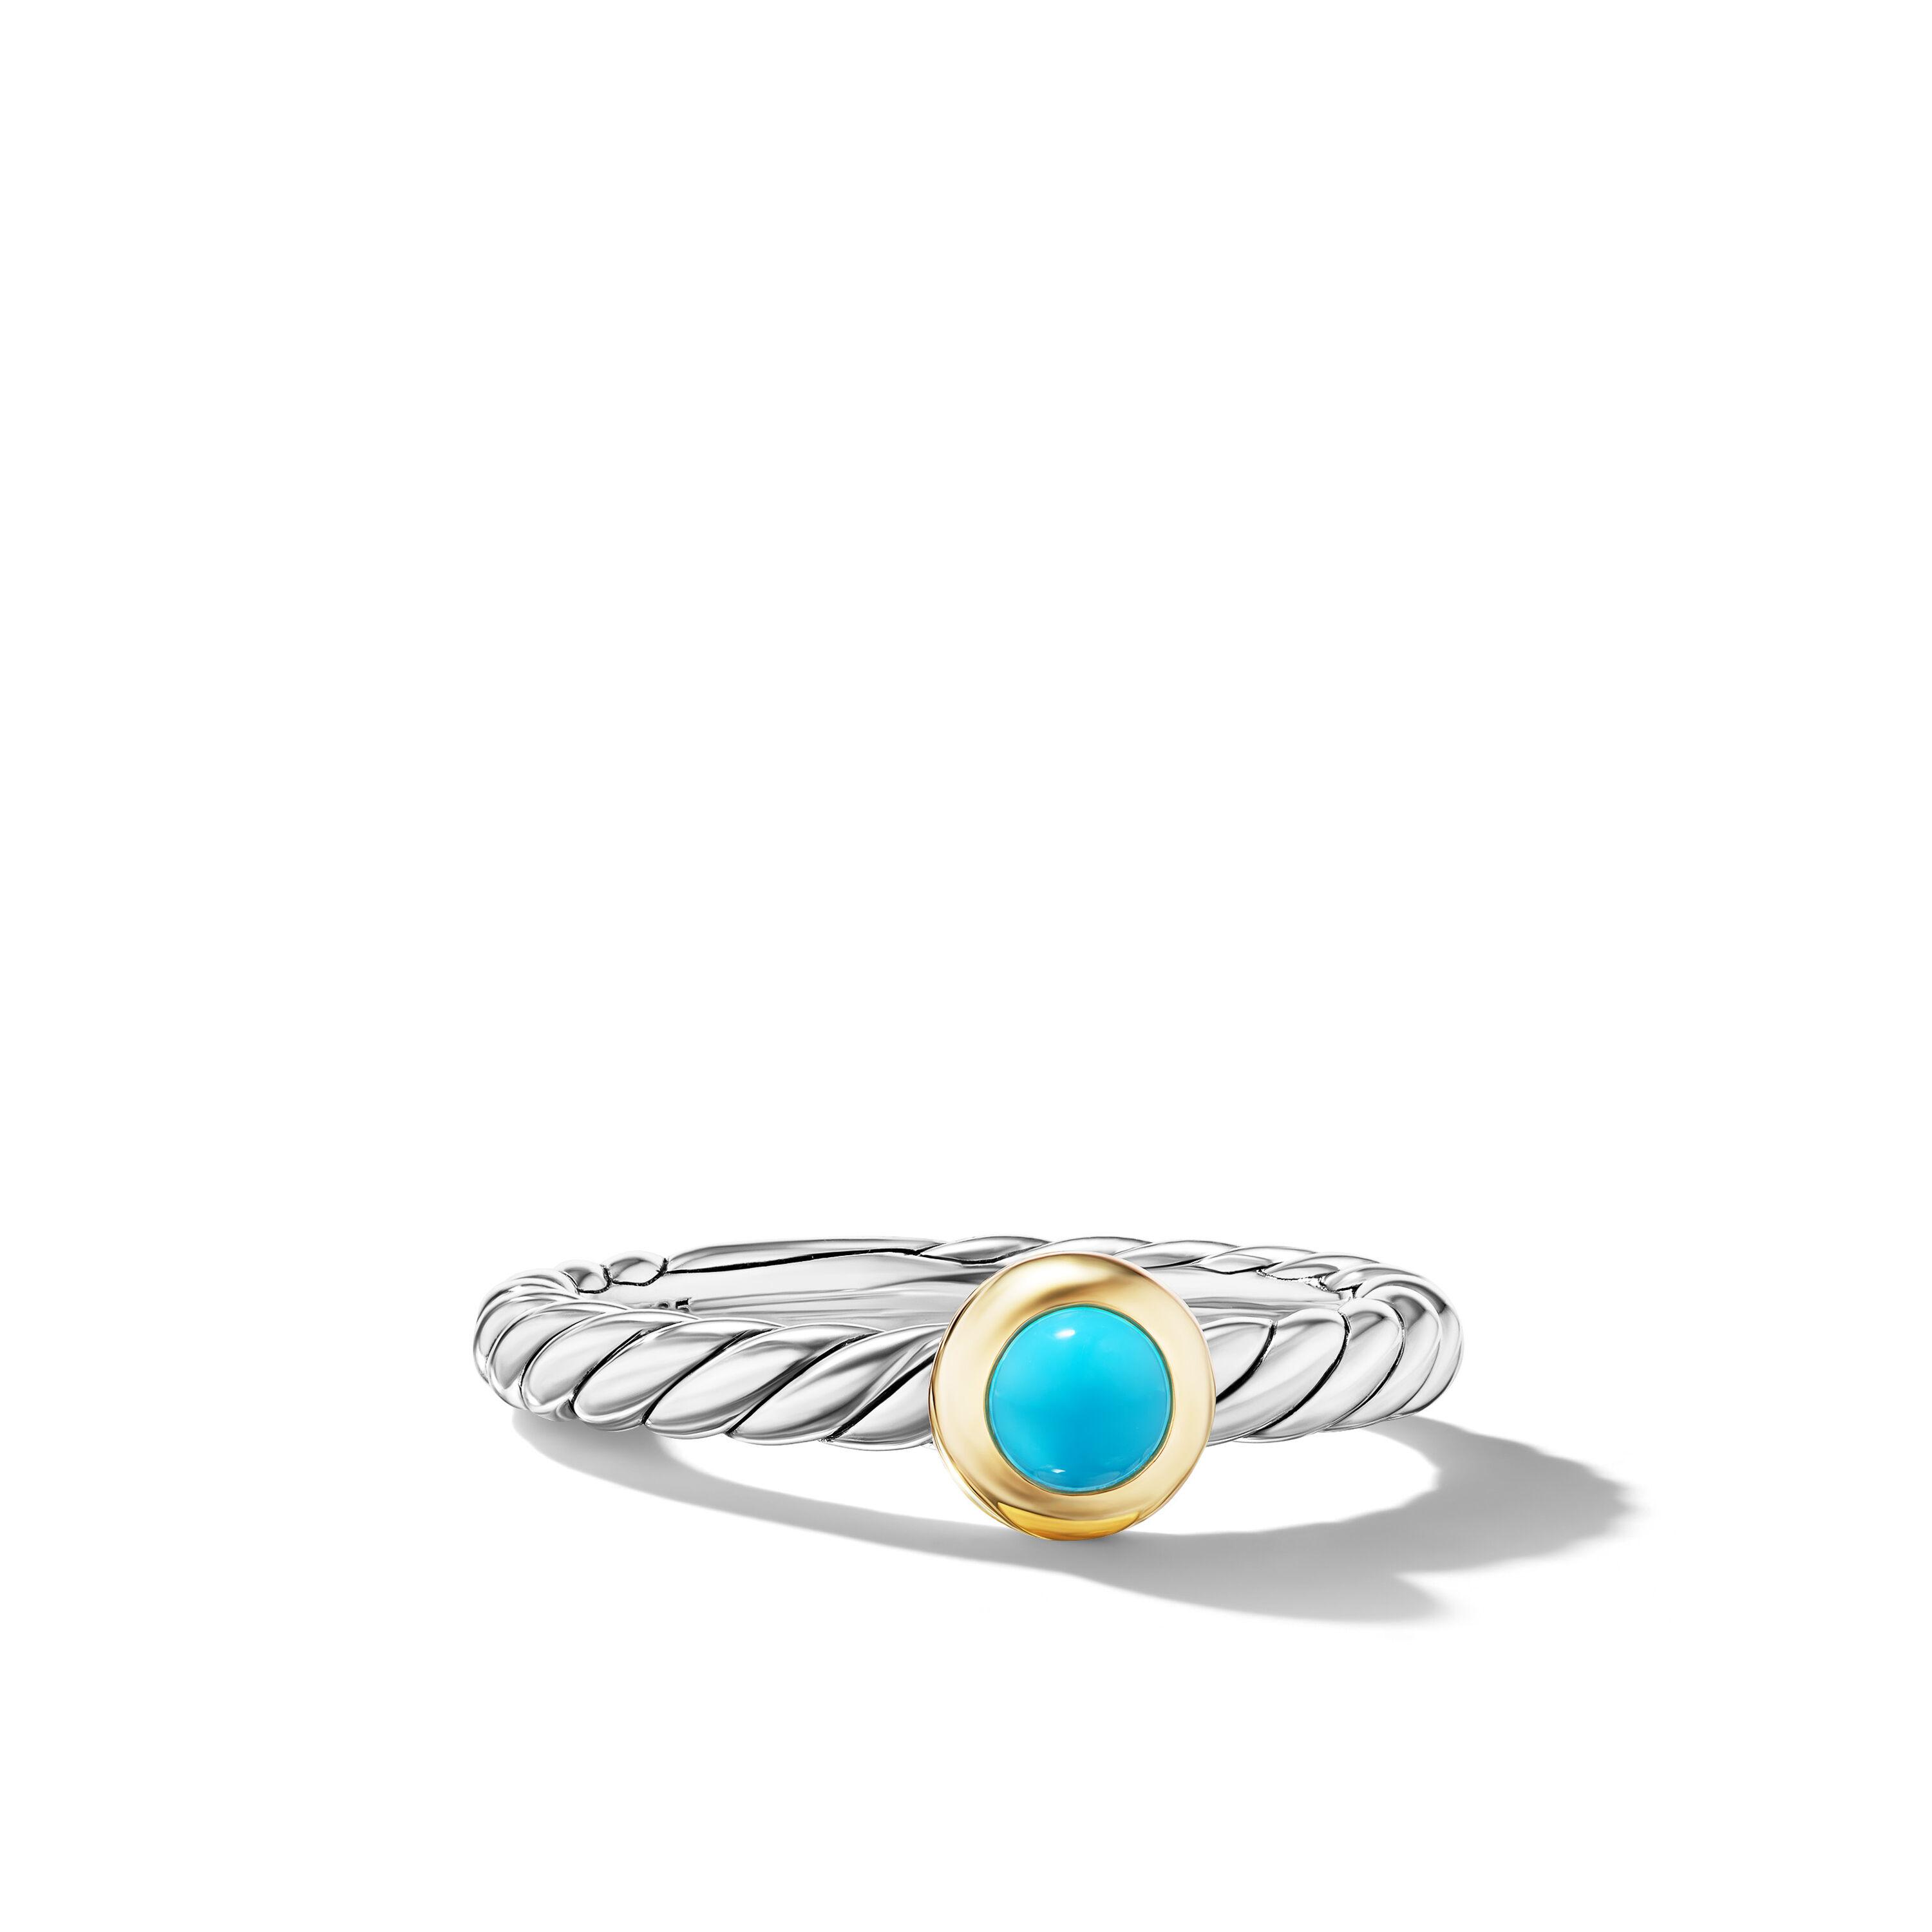 David Yurman Petite Cable Ring in Sterling Silver with 14K Yellow Gold and Turquoise, Size 7 0